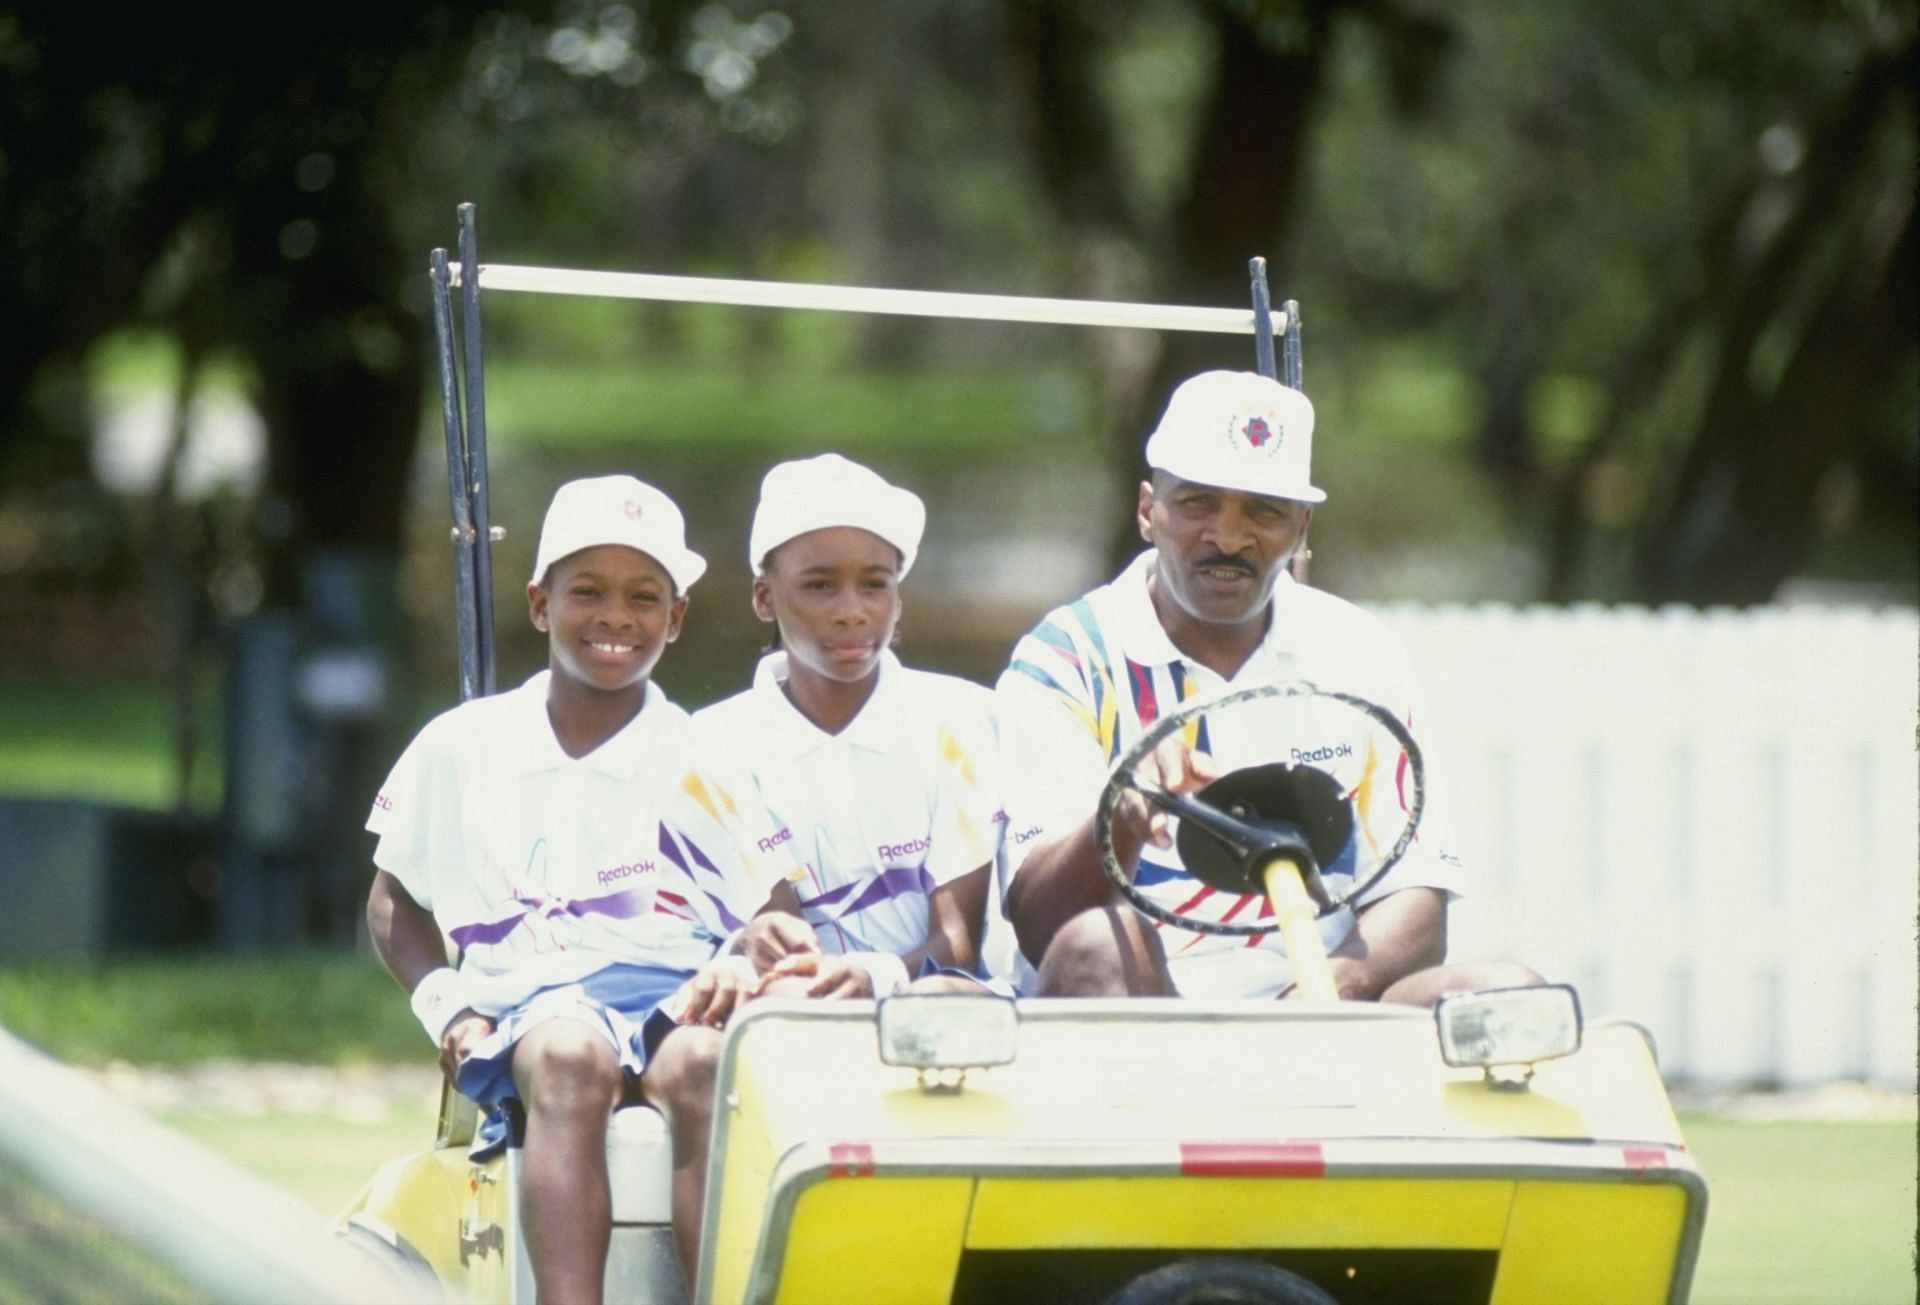 Serena (L) and Venus Williams at a tennis camp in Florida with father Richard Williams in 1992.